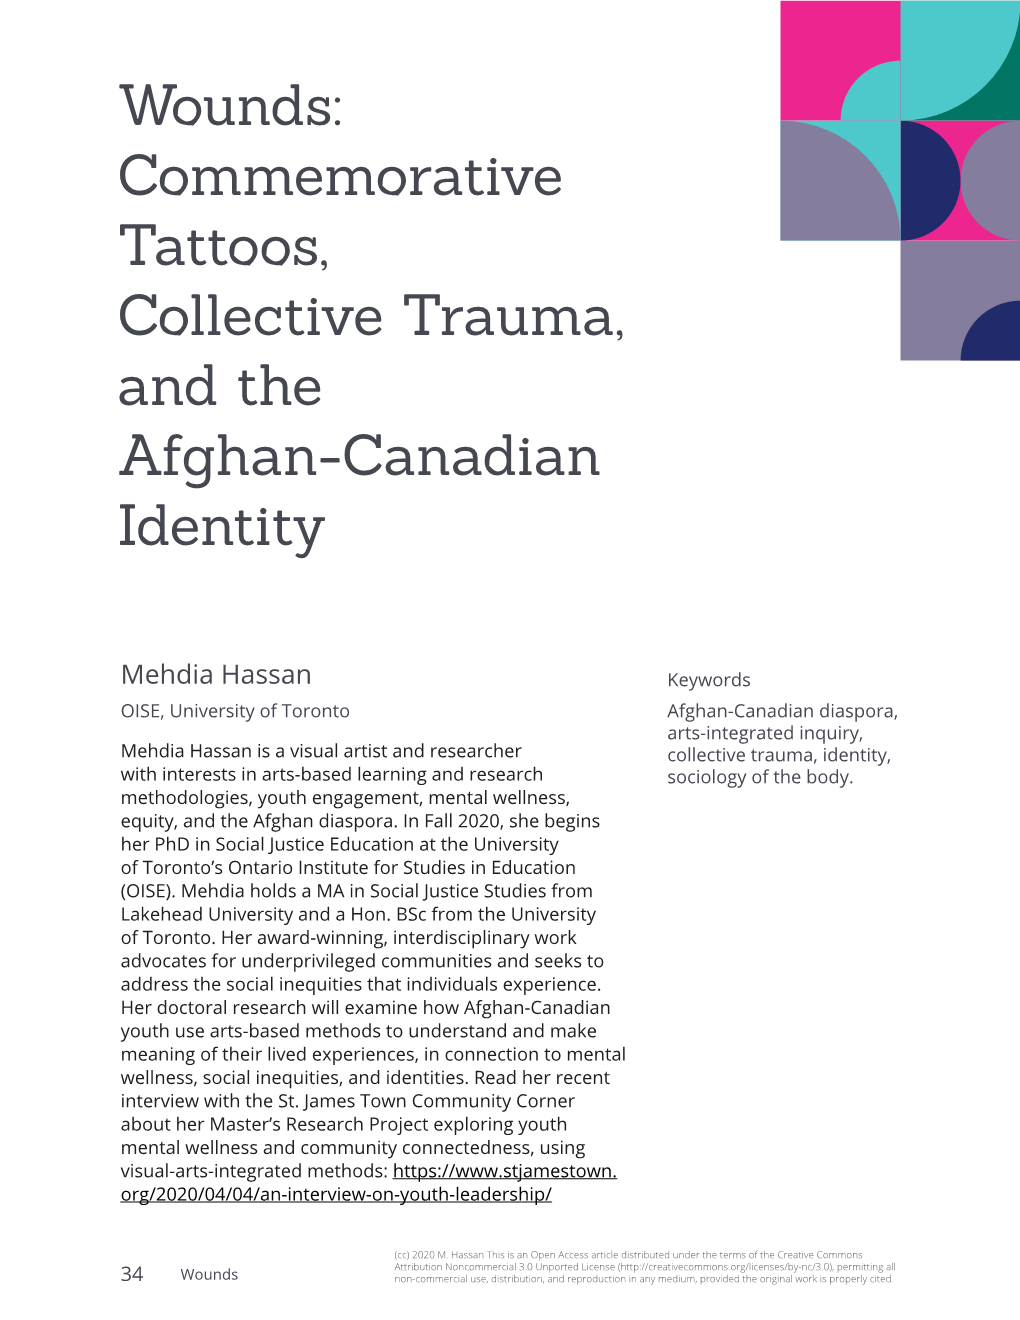 Commemorative Tattoos, Collective Trauma, and the Afghan-Canadian Identity